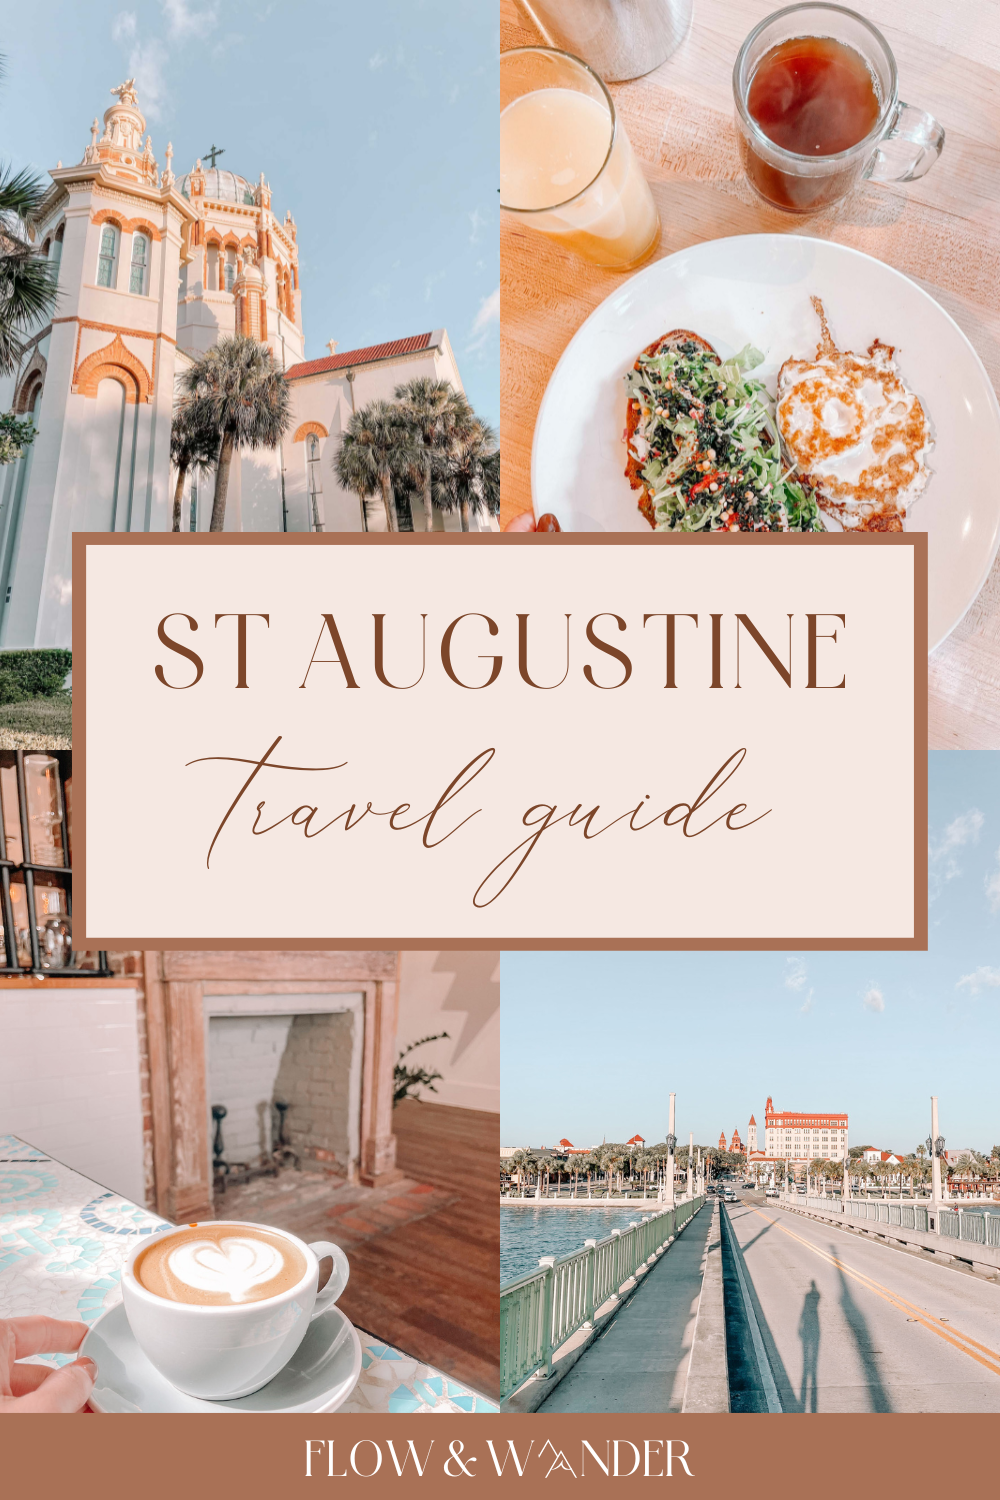 st augustine florida travel guide graphic1.png